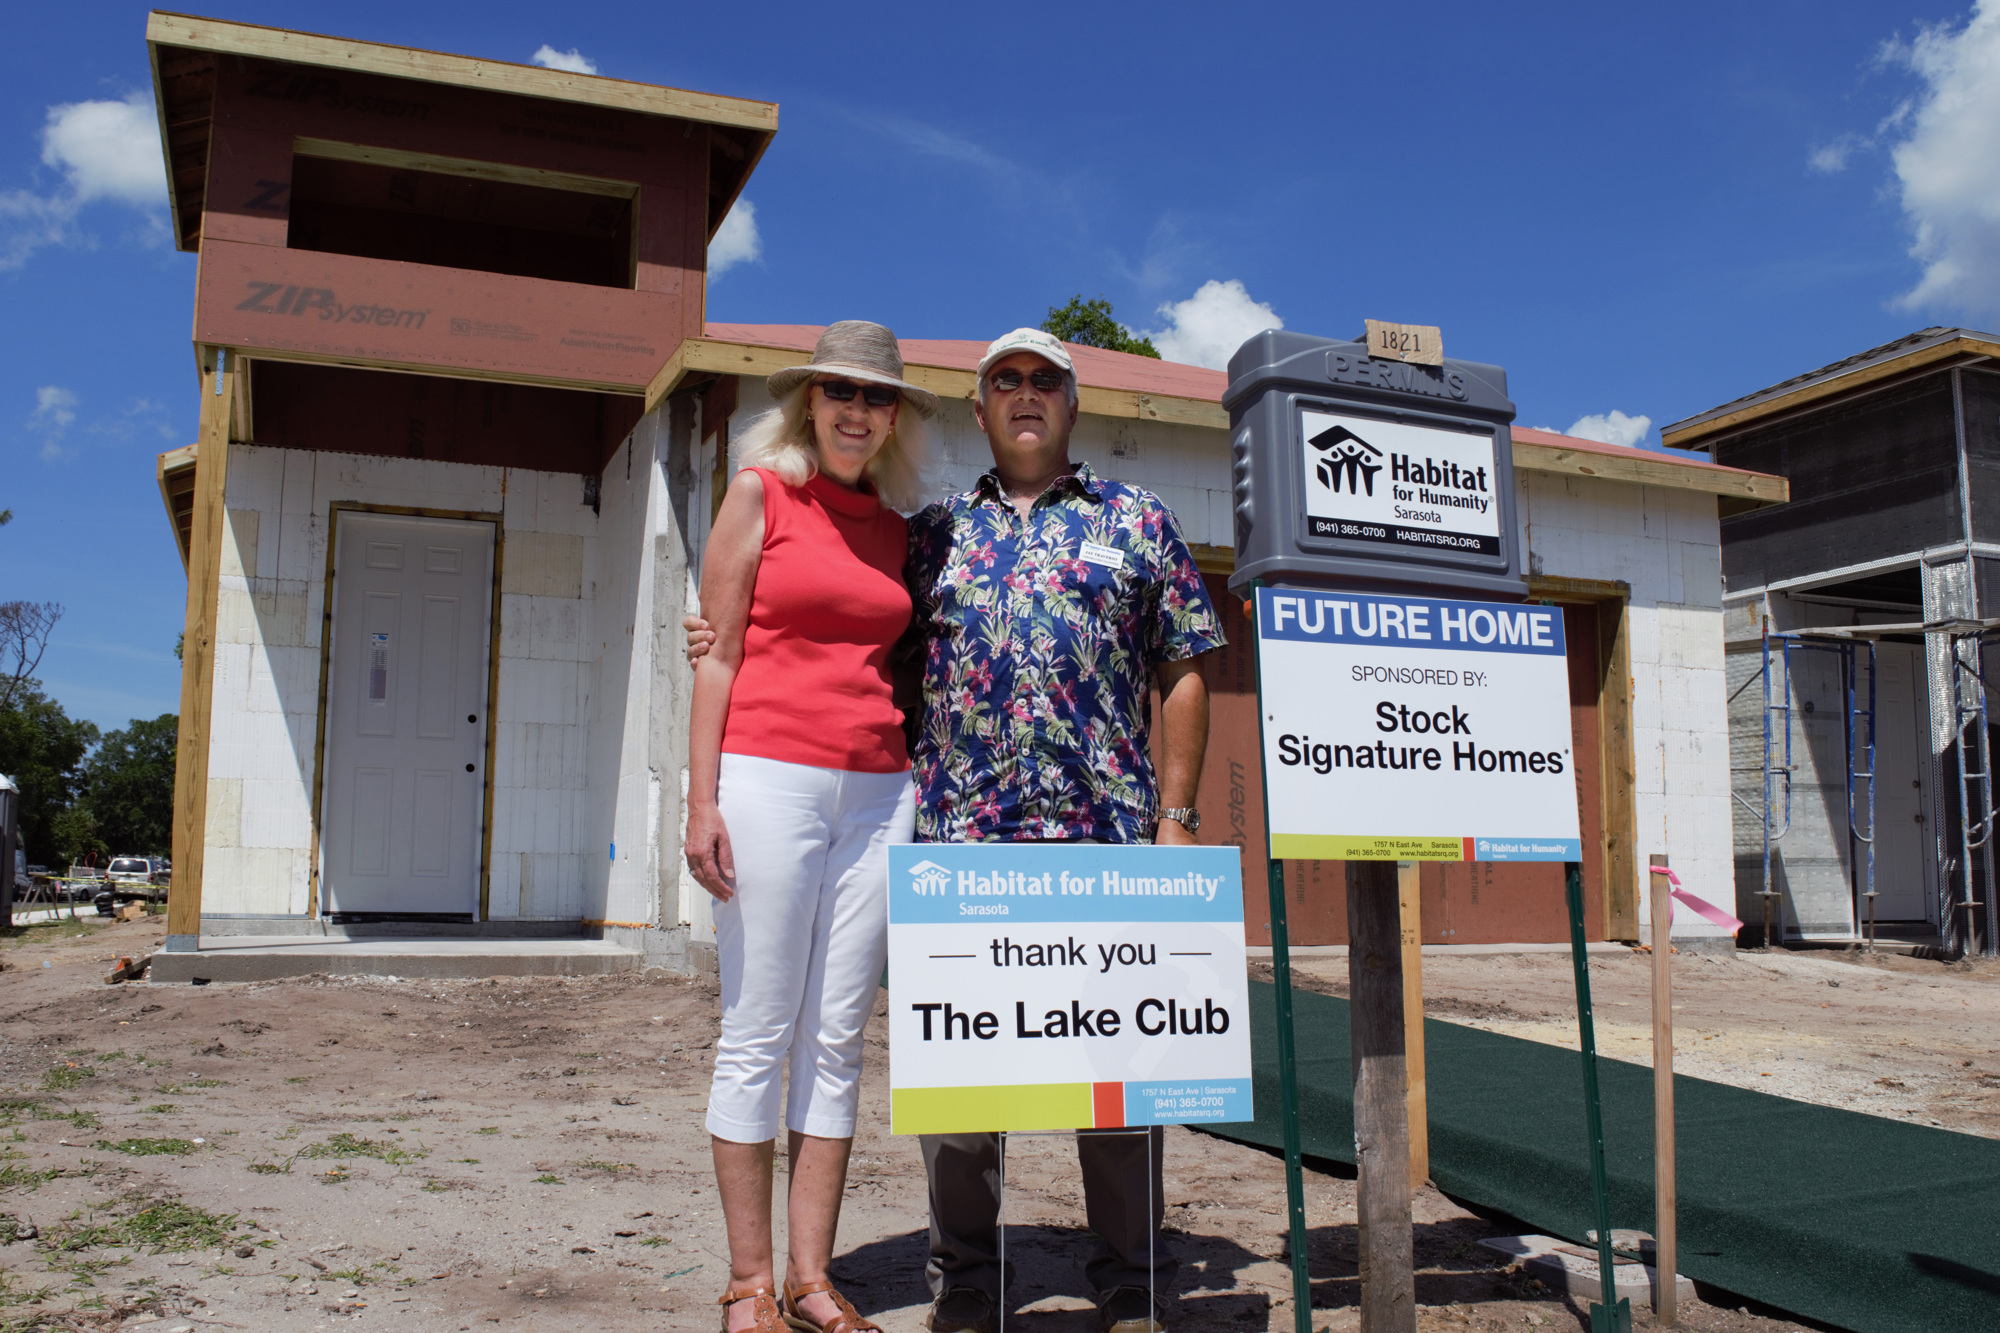 Marybeth and Jay Traverso in front of one of two Hammock Place homes sponsored by Stock Signature Homes in partnership with the Lake Club residents.